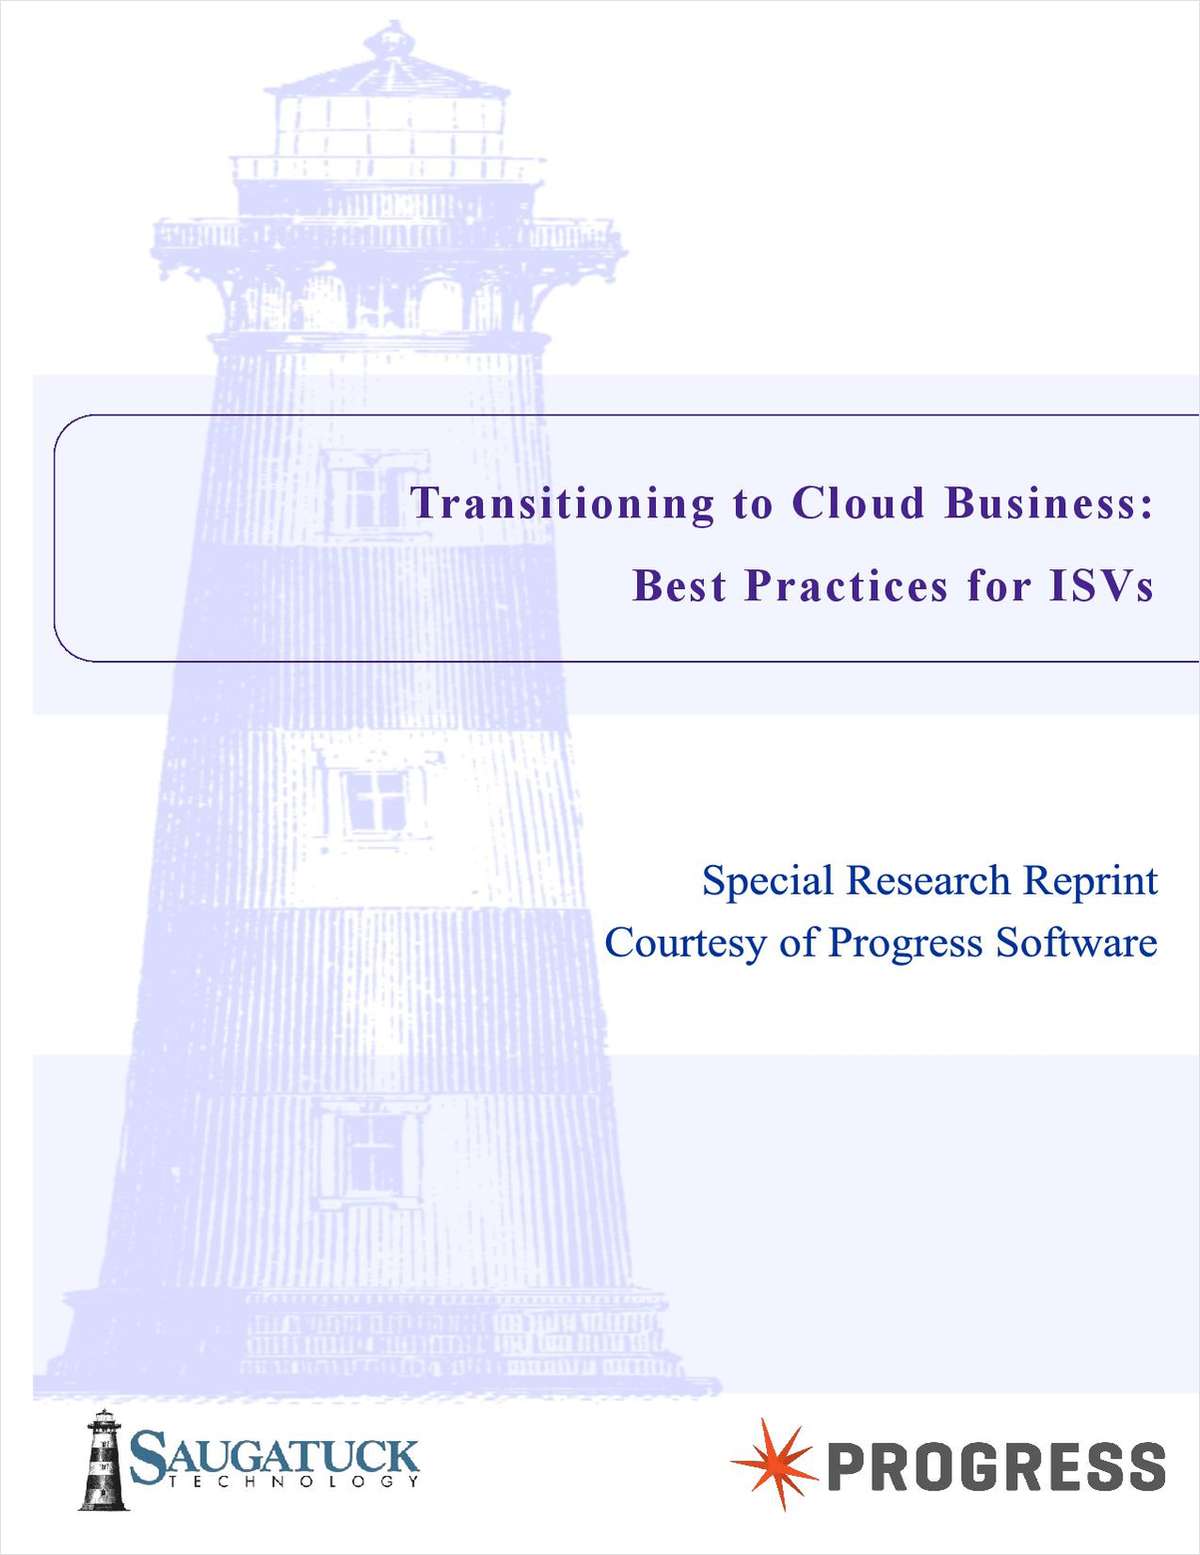 Saugatuck Strategic Report - Transitioning to Cloud Business: Best Practices for ISVs